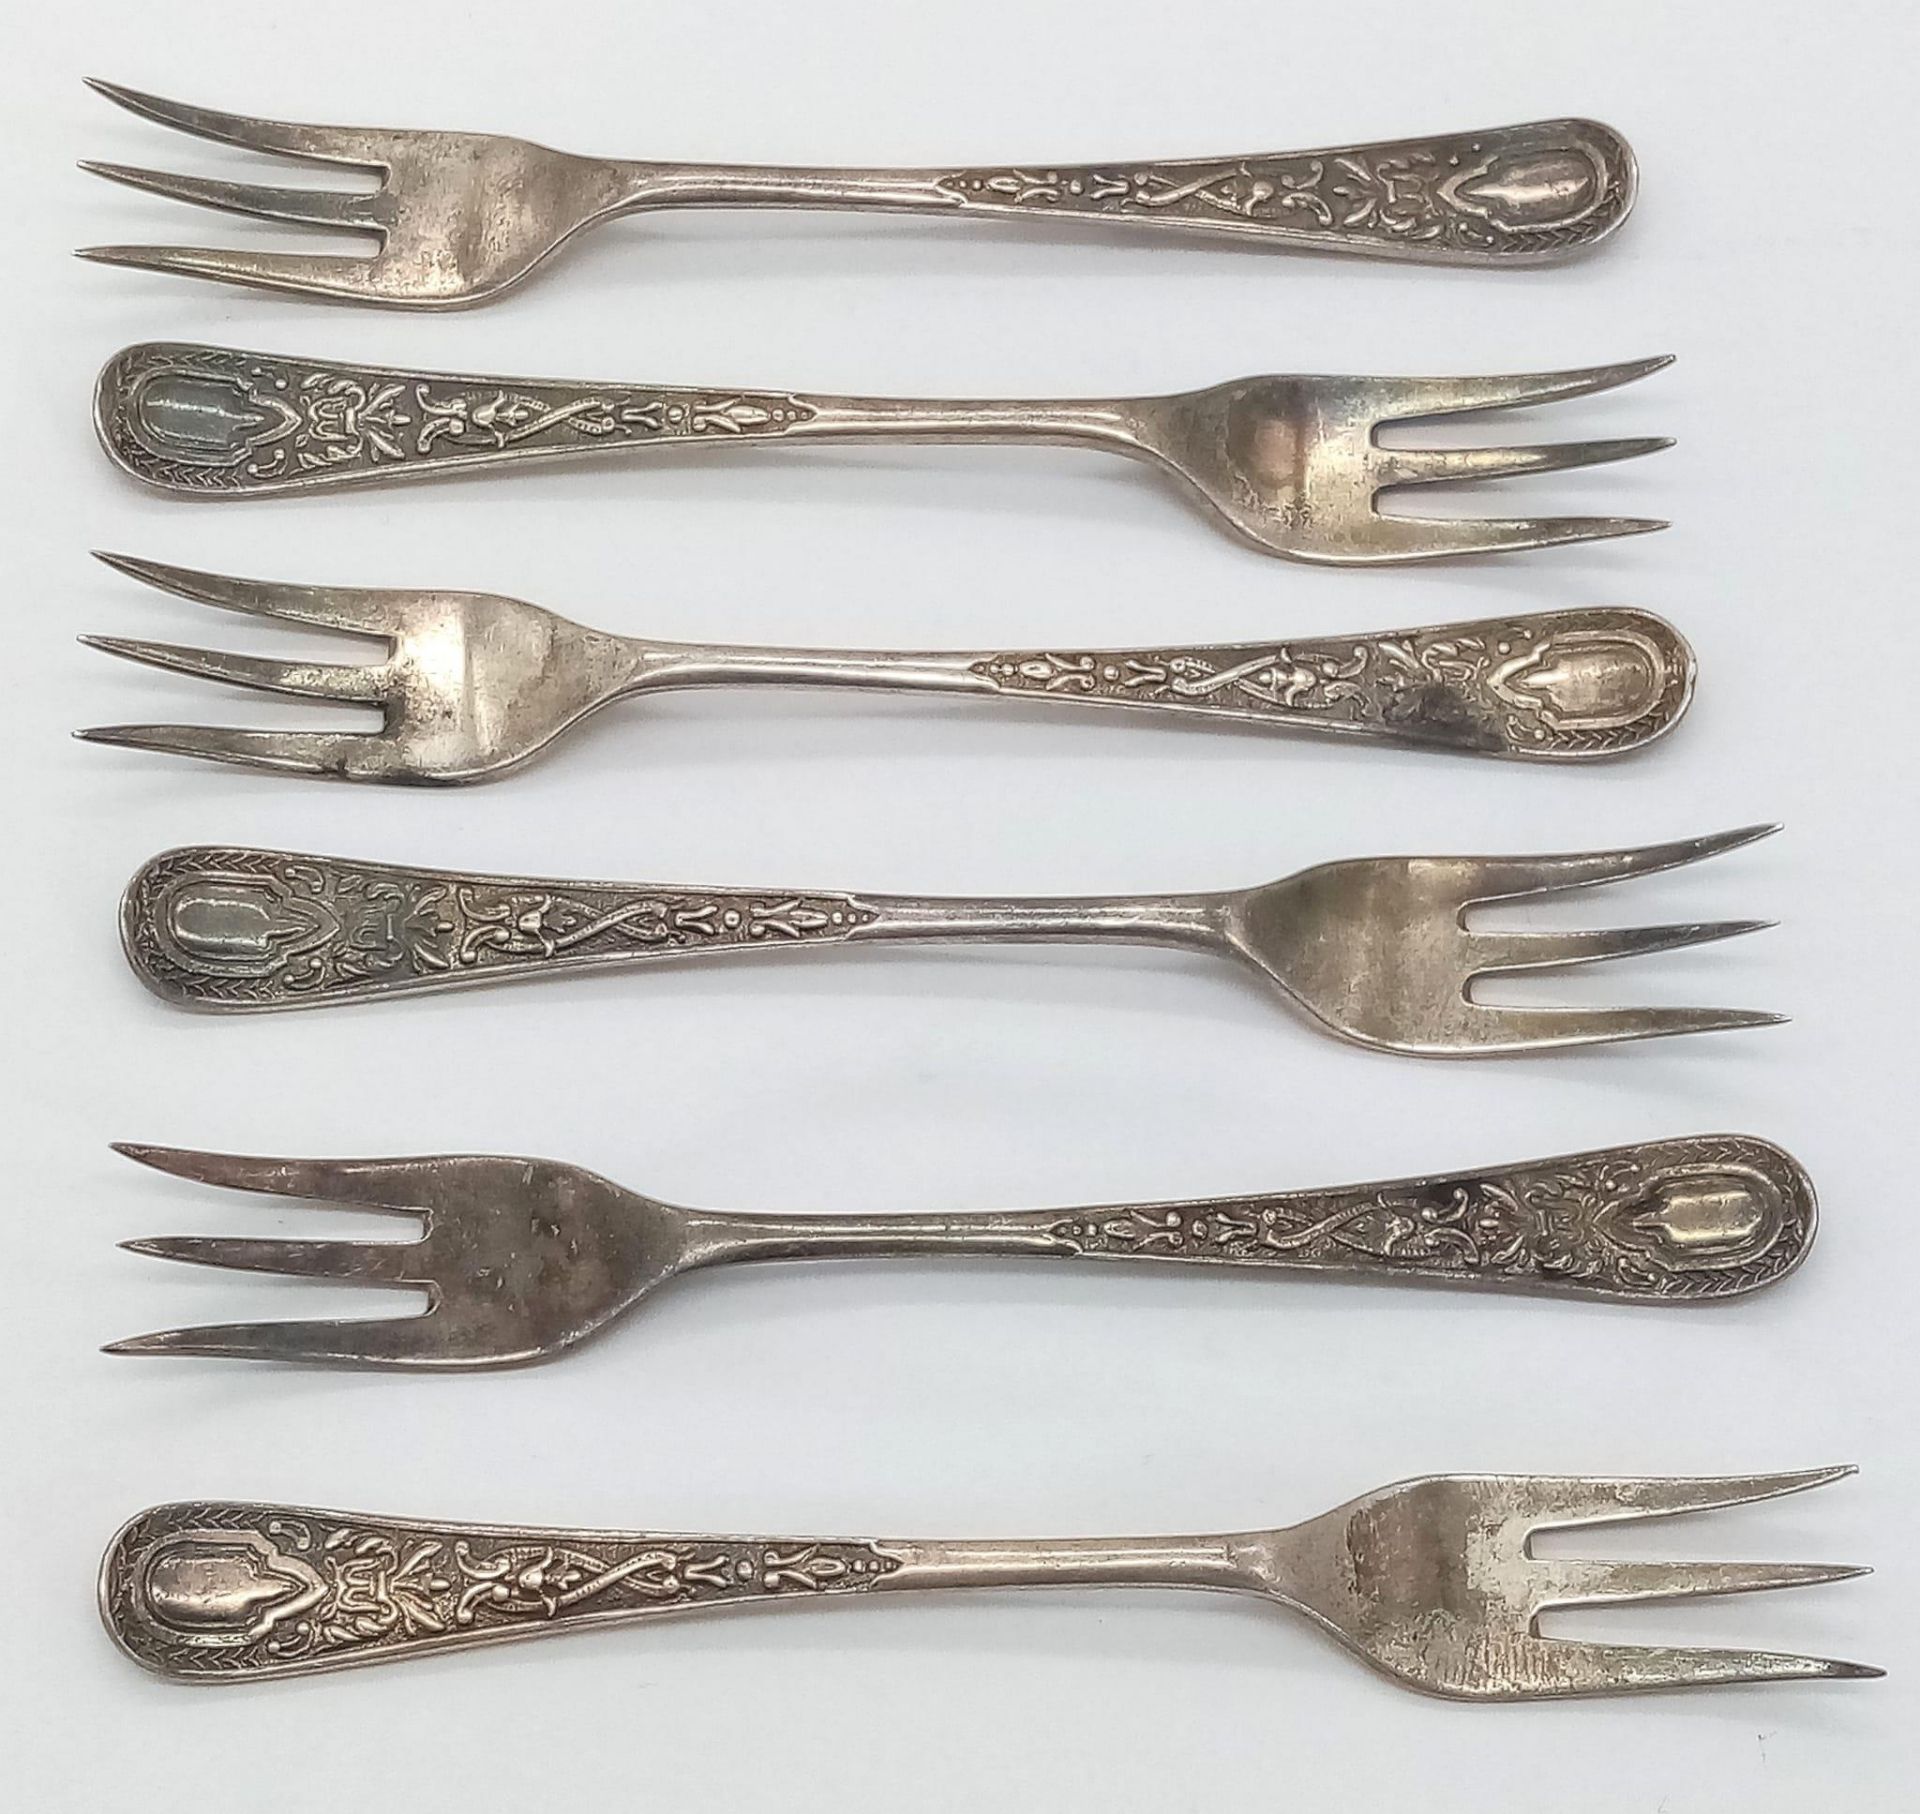 A set of 6 Antique sterling silver dessert forks with nicely ornate decoration on the body. Full